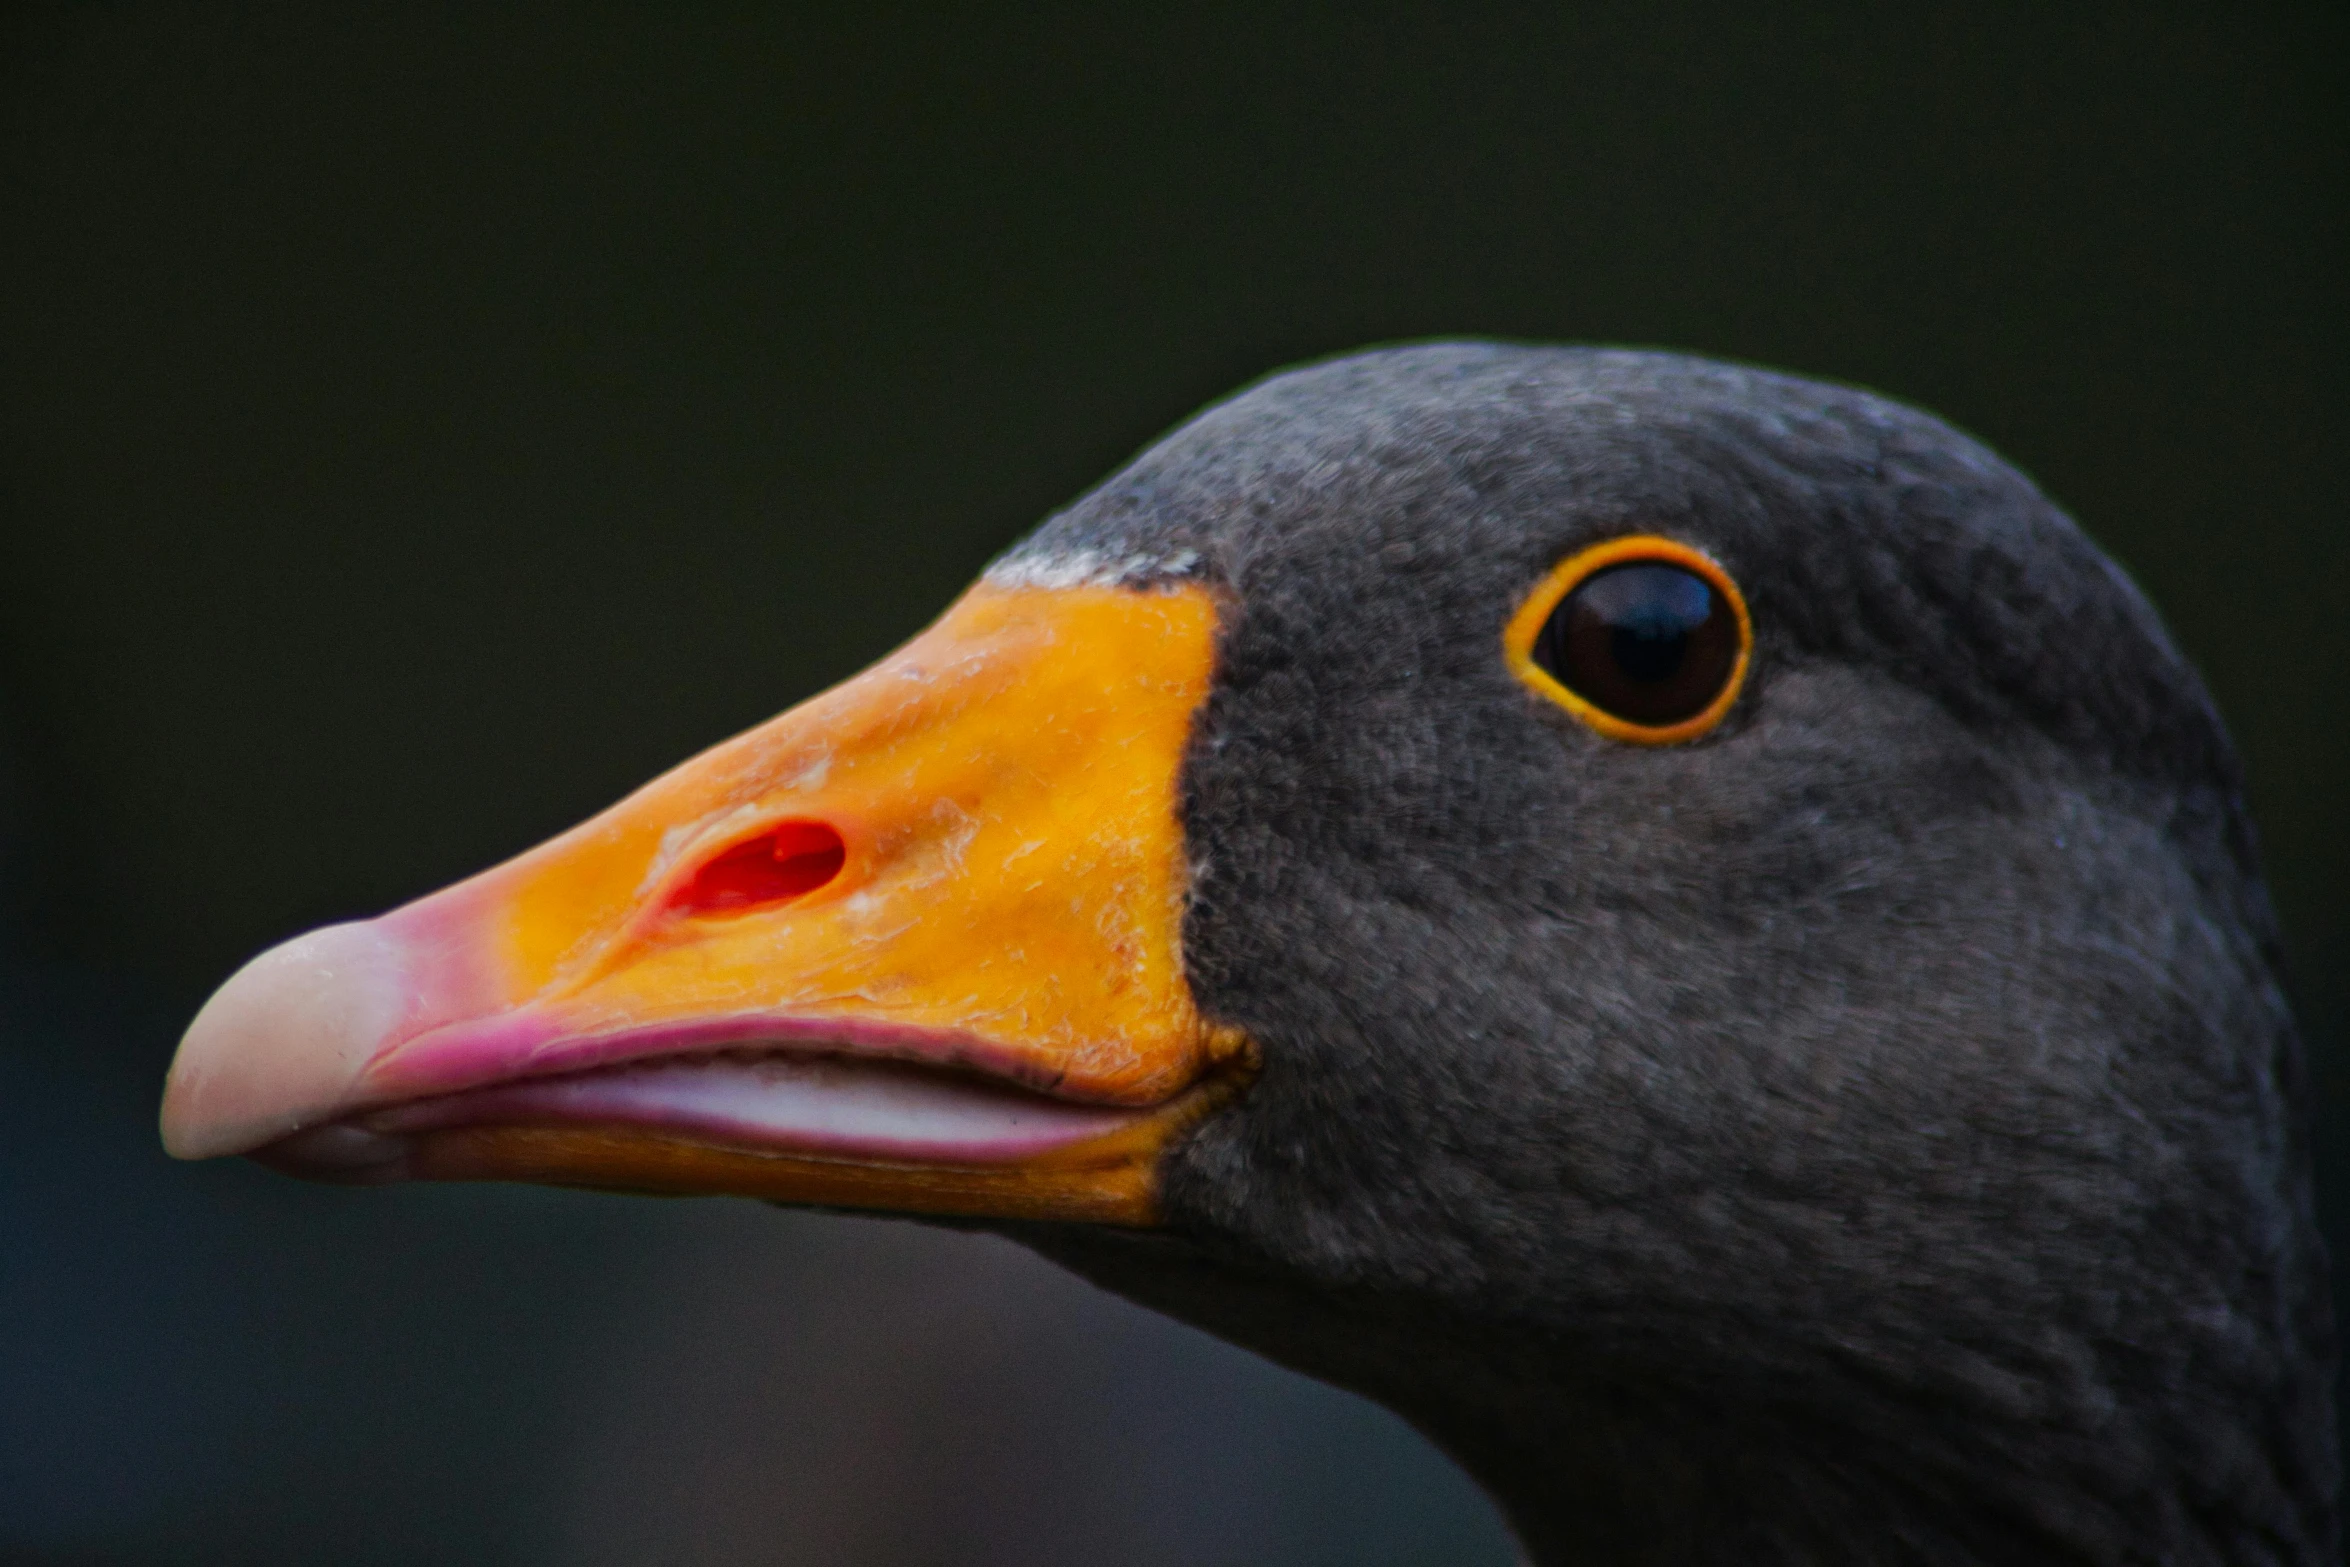 a closeup po of the head and neck of a duck